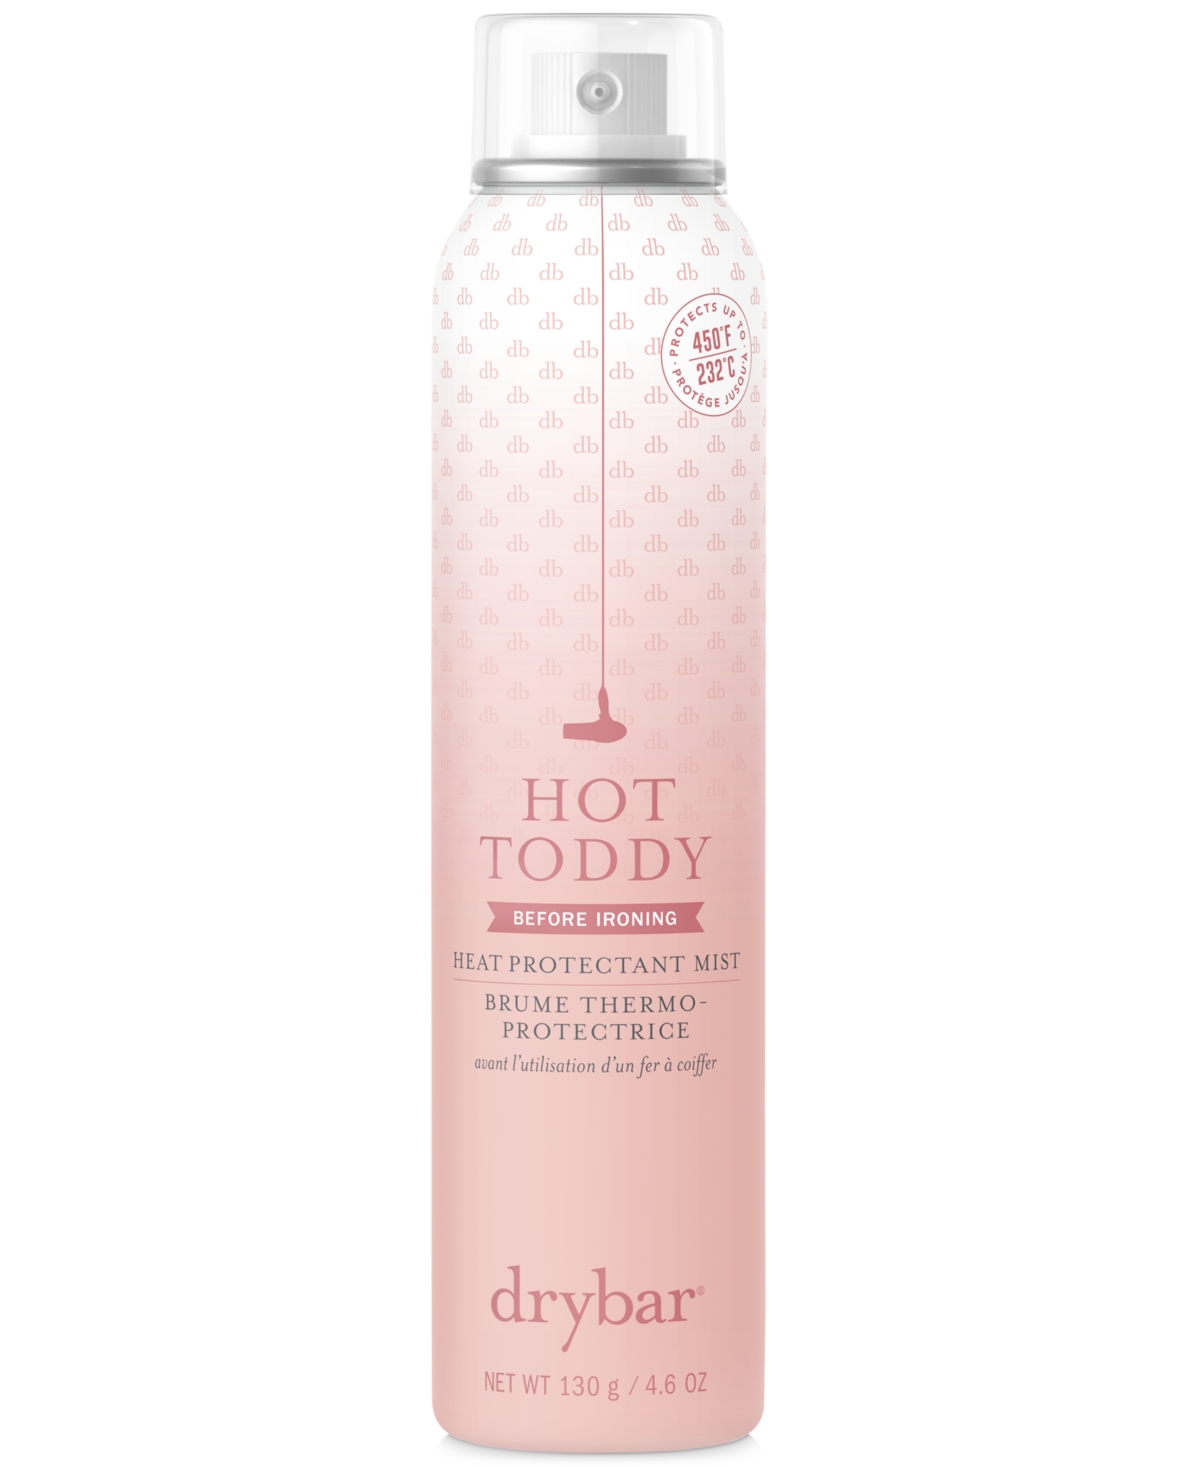 Hot Toddy Heat Protectant Mist, 4.6-oz.